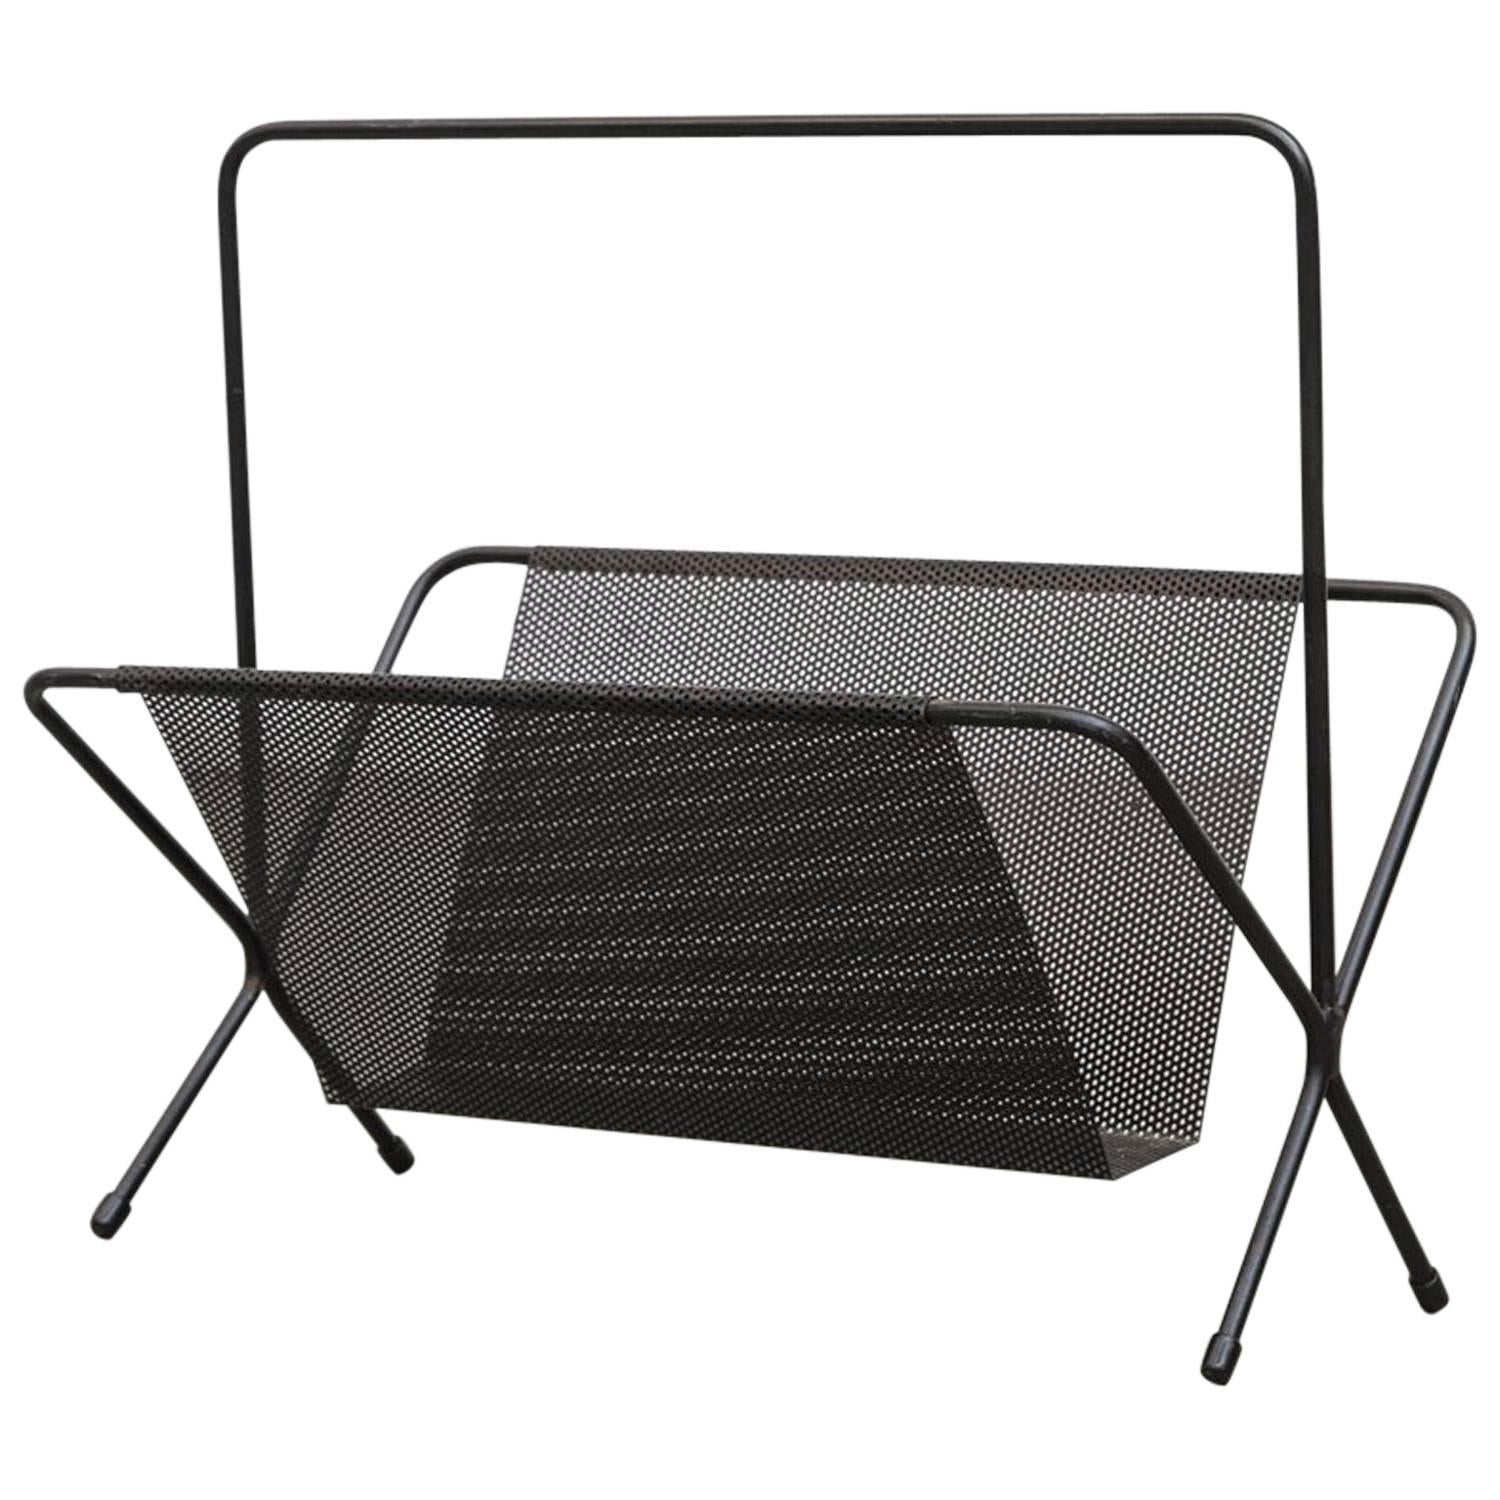 Perforated Metal Magazine Stand Attributed to Pilastro